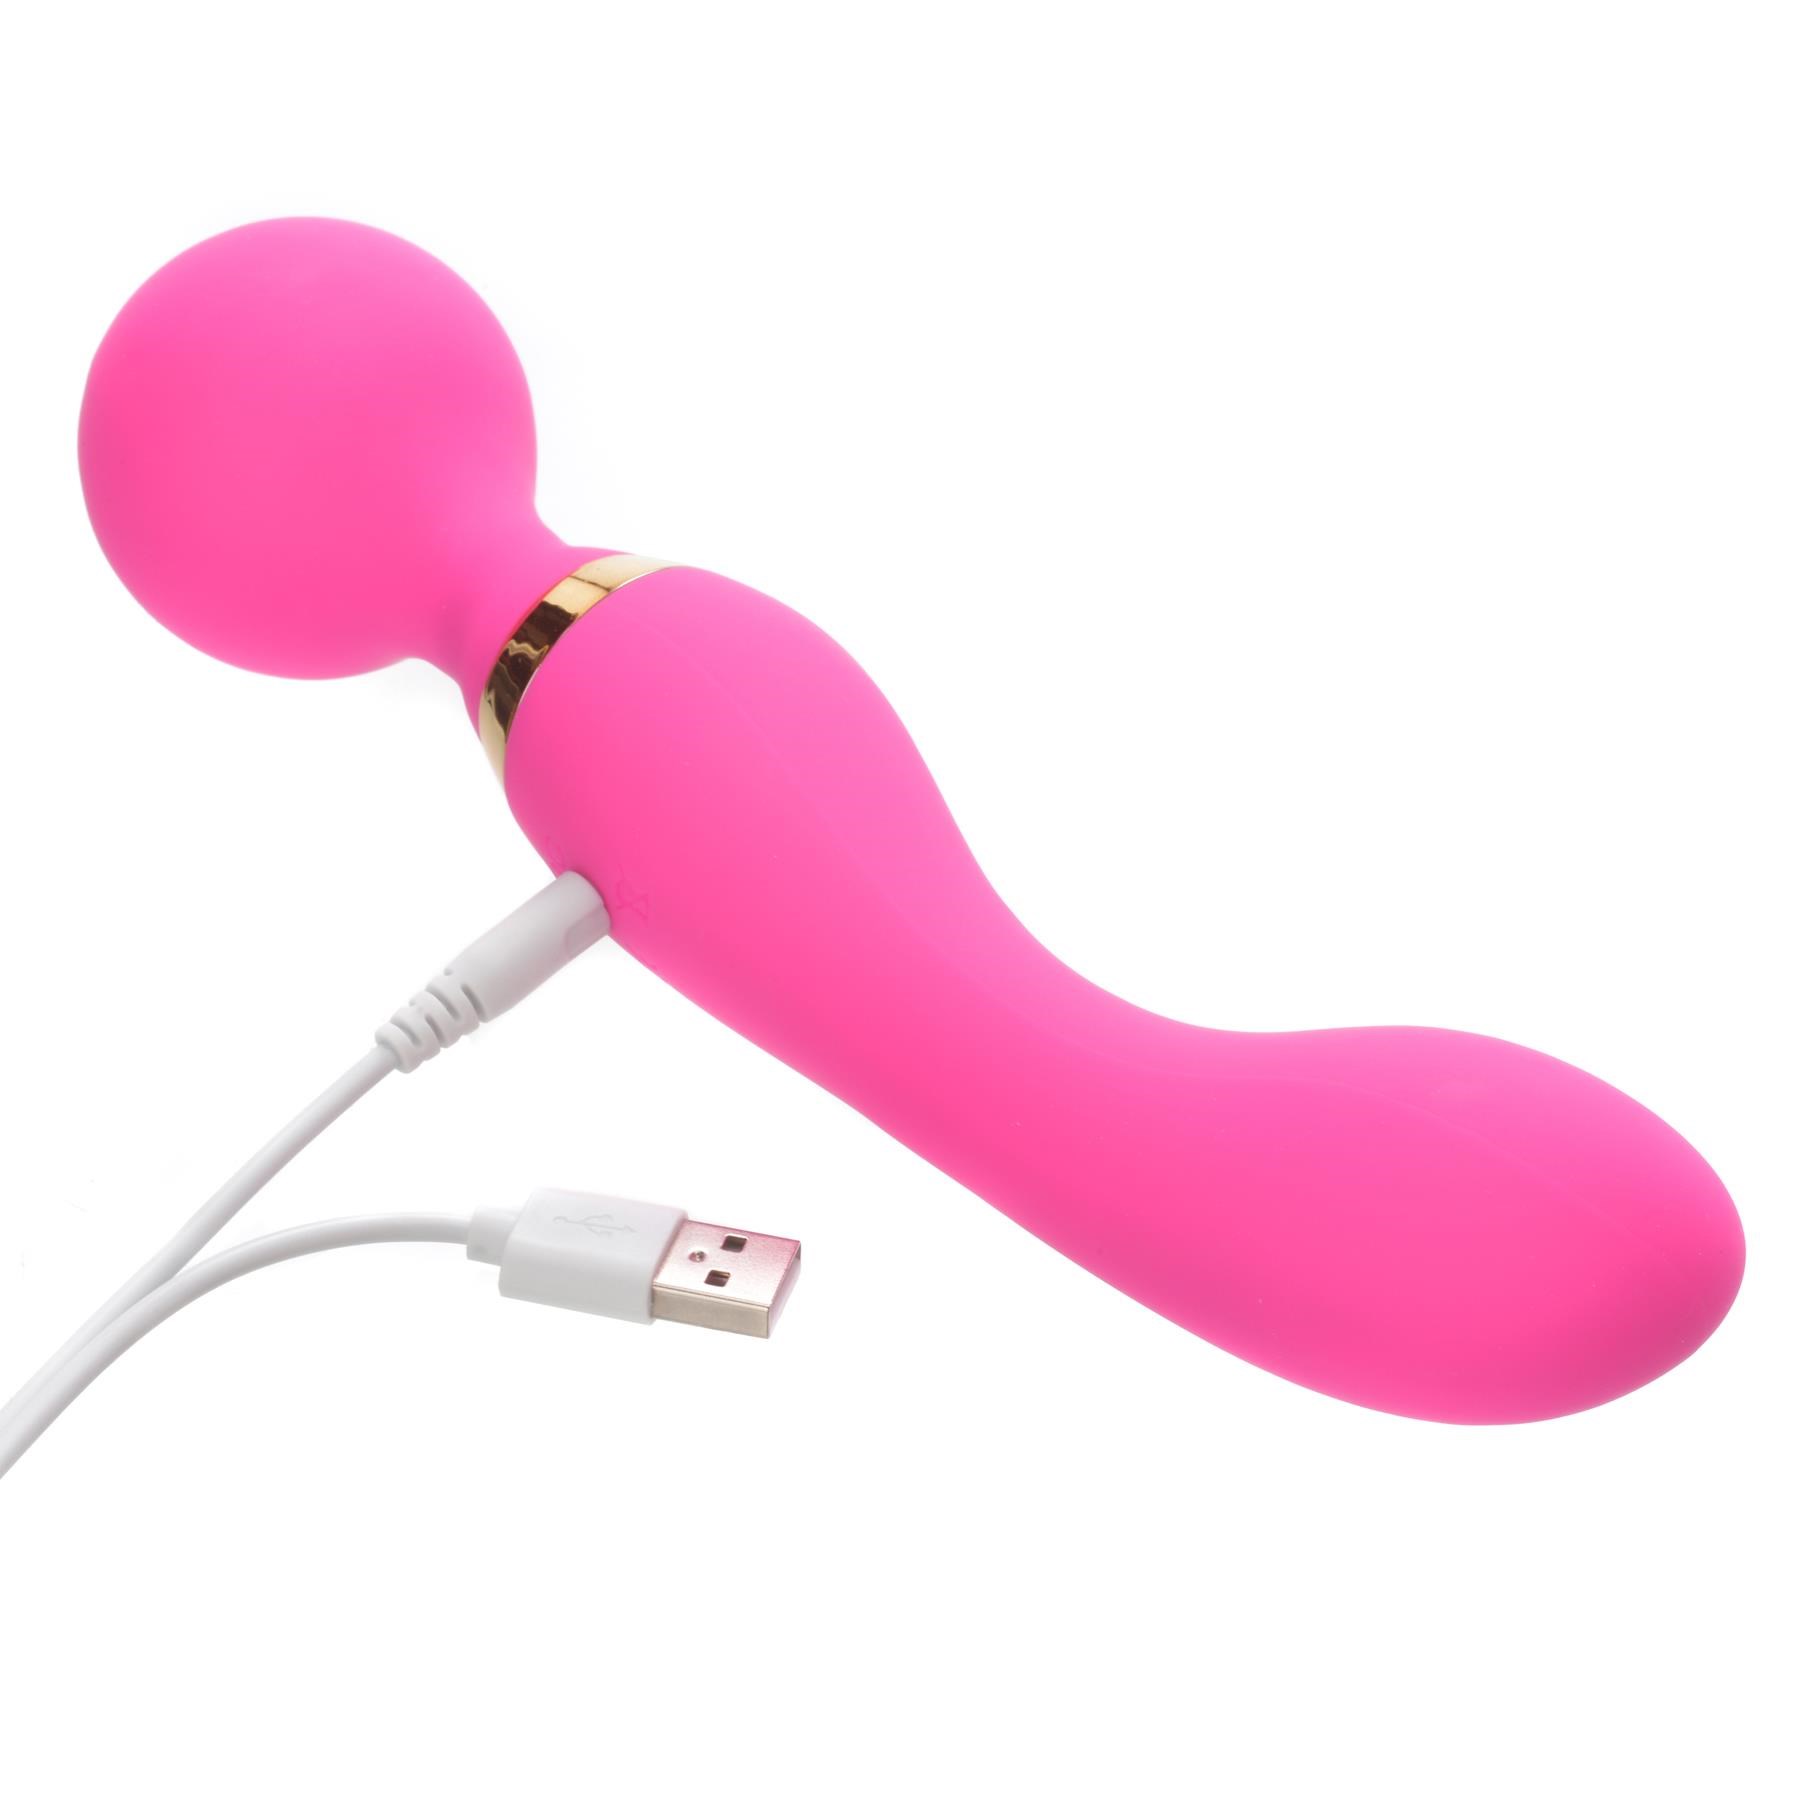 Dual Pleasures Rechargeable Wand Massager- Showing Where Charging Cable is Placed